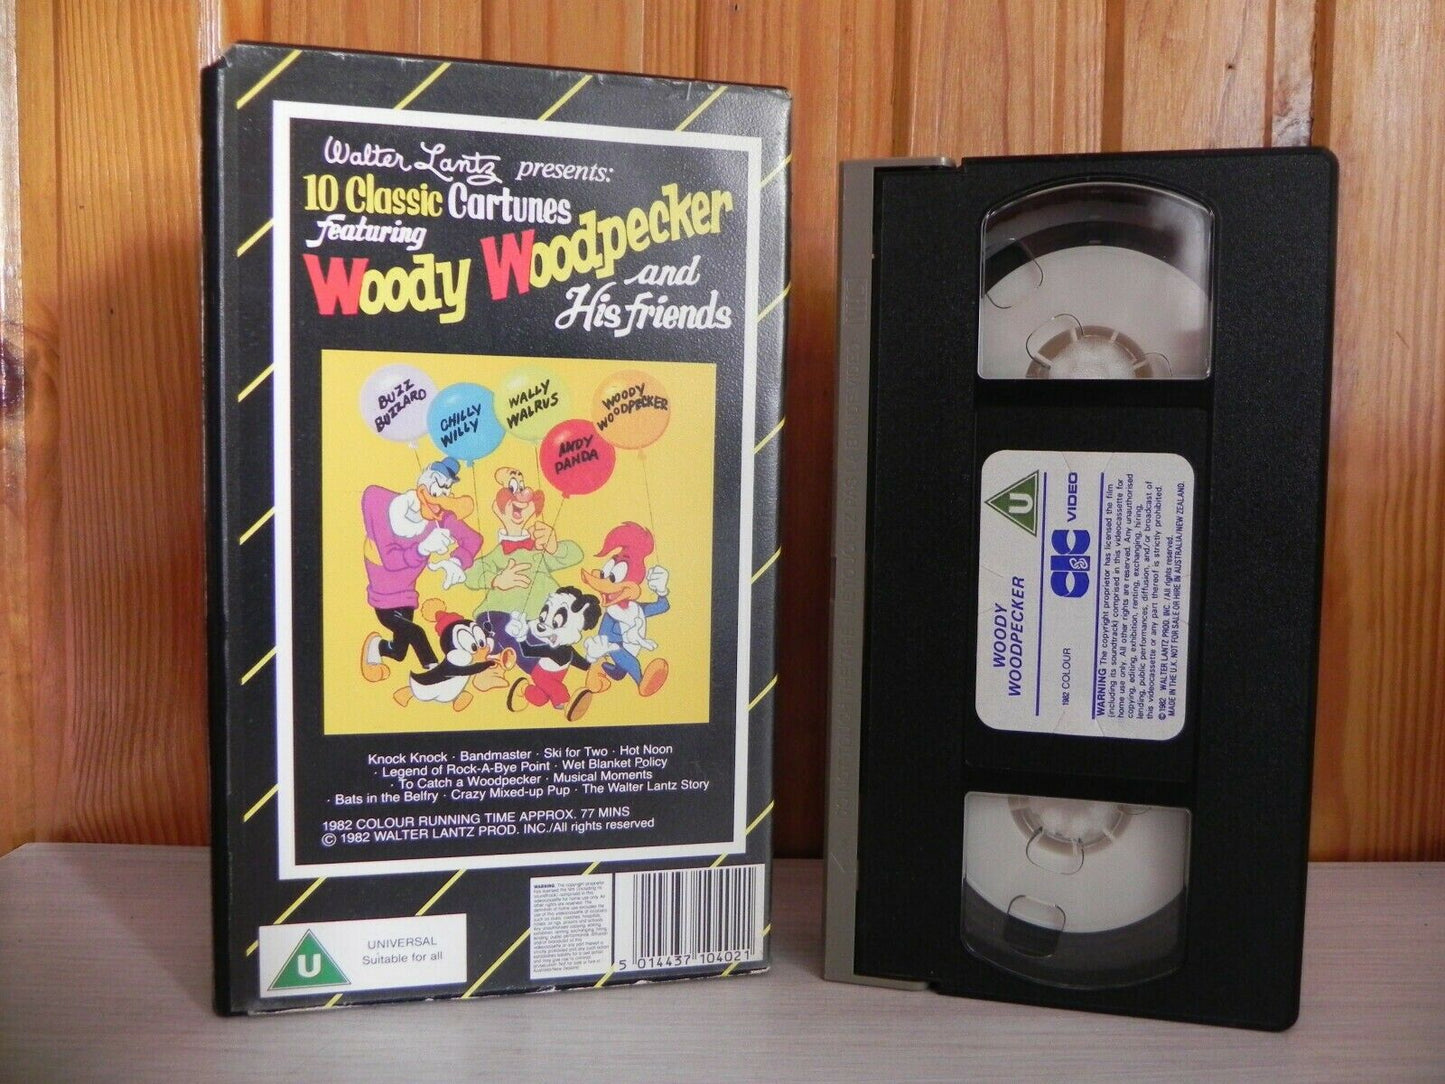 Woody Woodpecker And His Friends: (1982) Pre-Cert - Animated - Children's - VHS-